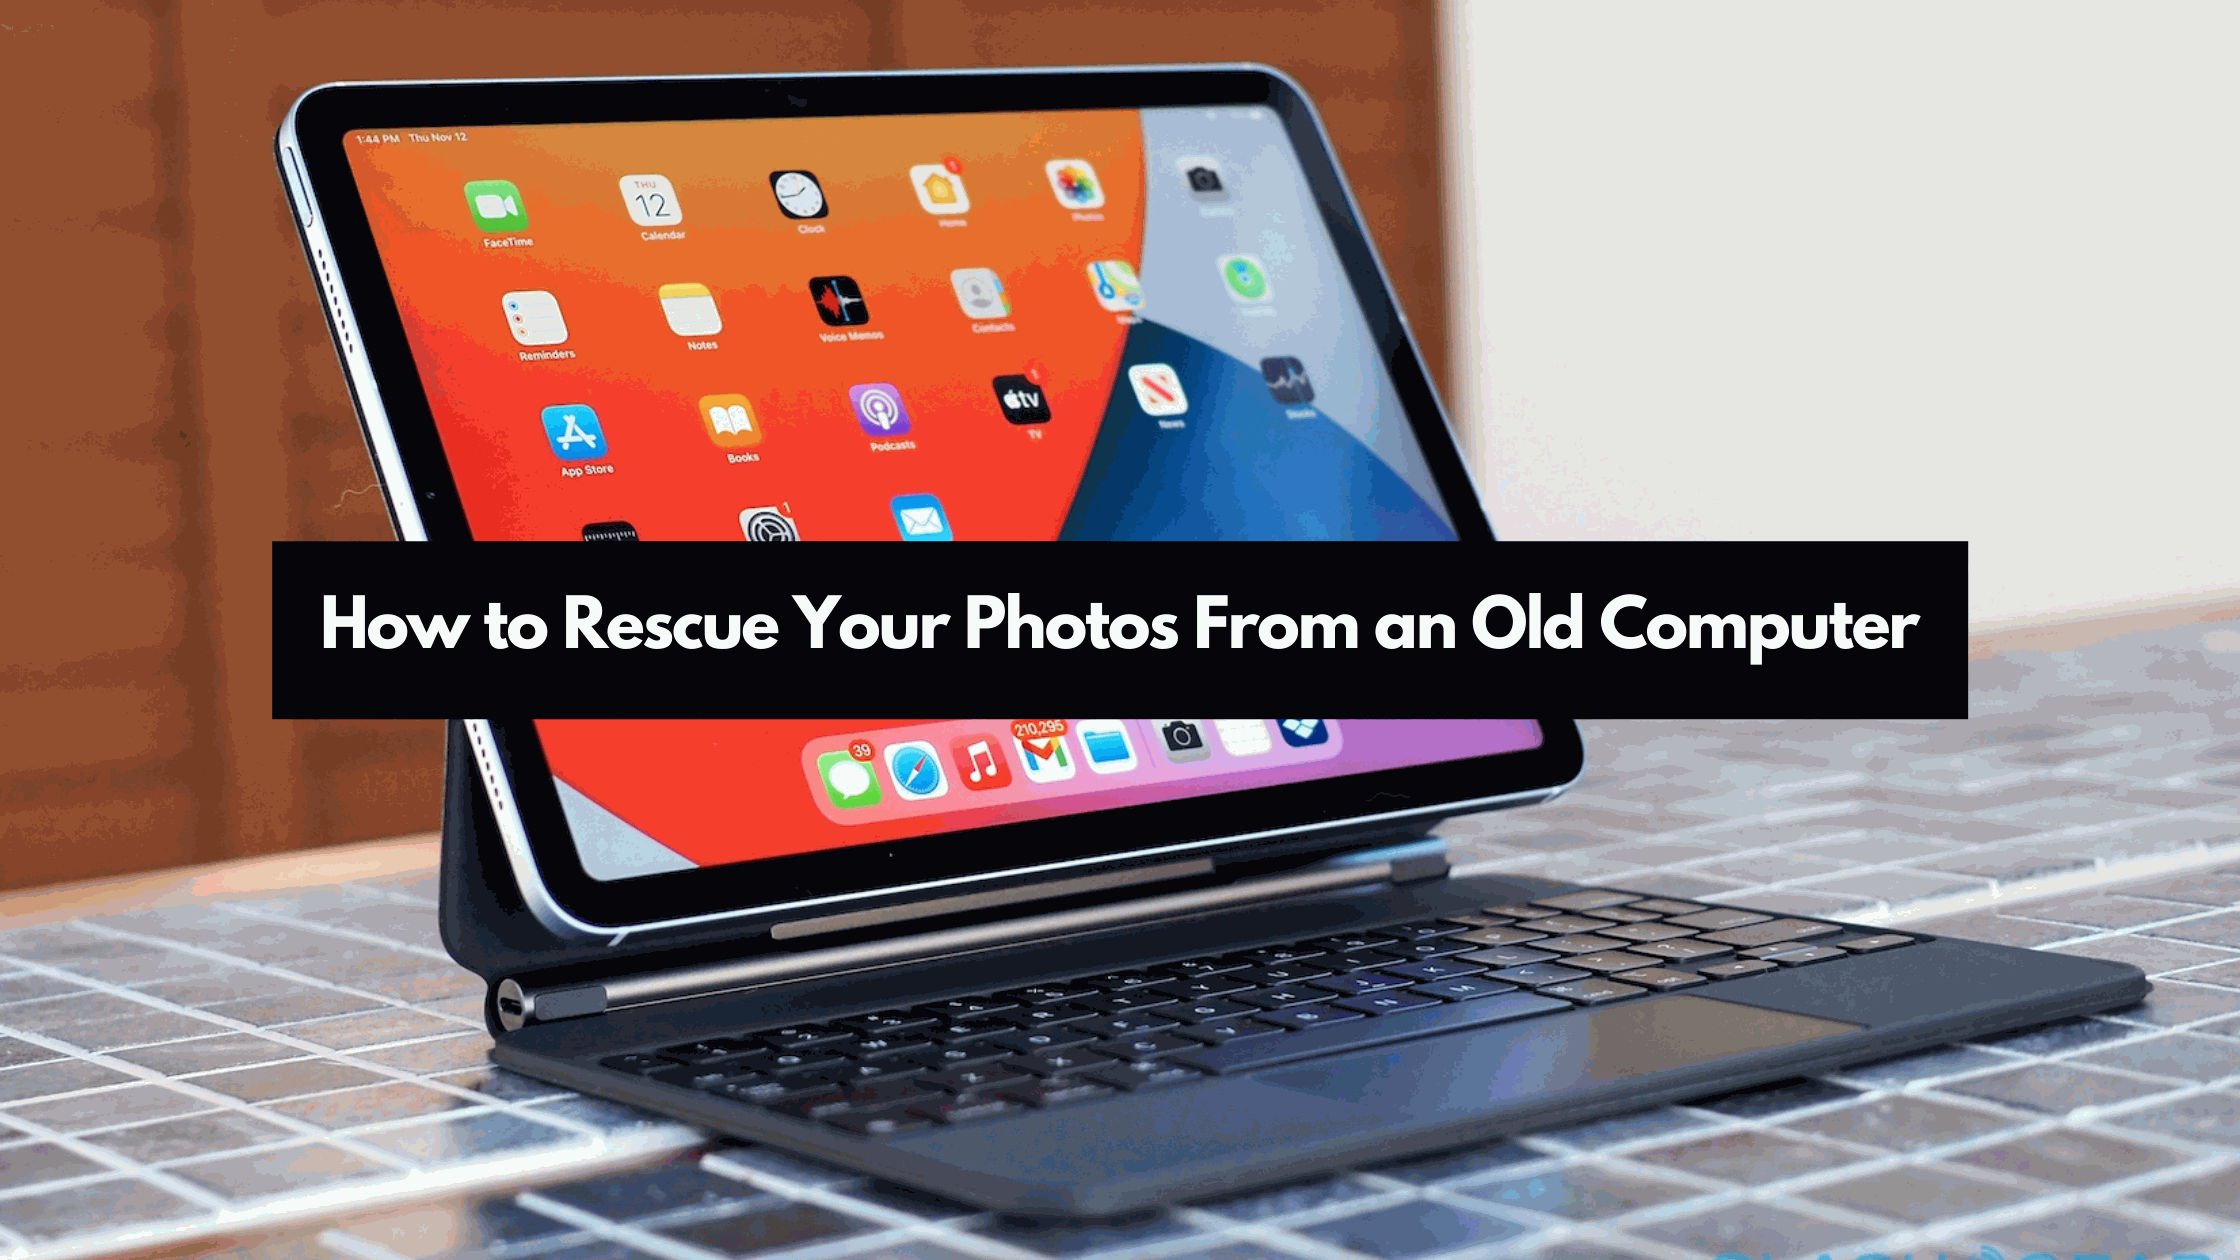 How to Rescue Your Photos From an Old Computer